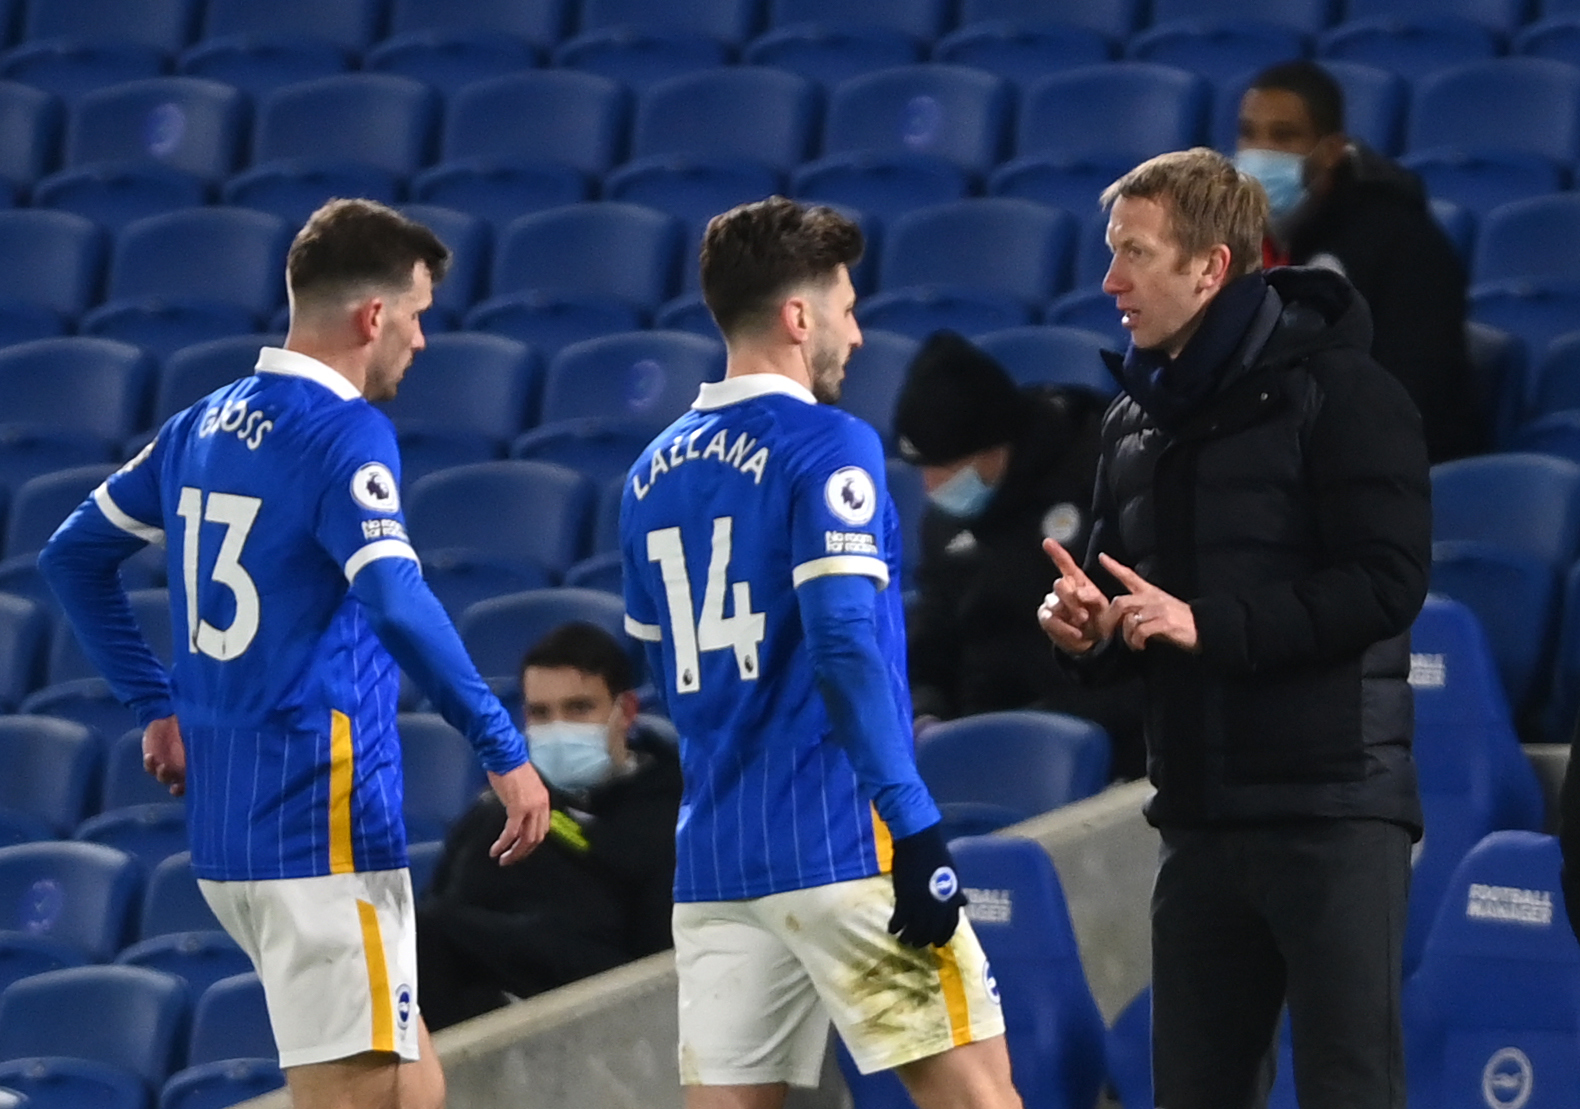 Graham Potter felt their defeat to Leicester was a 'sore' one